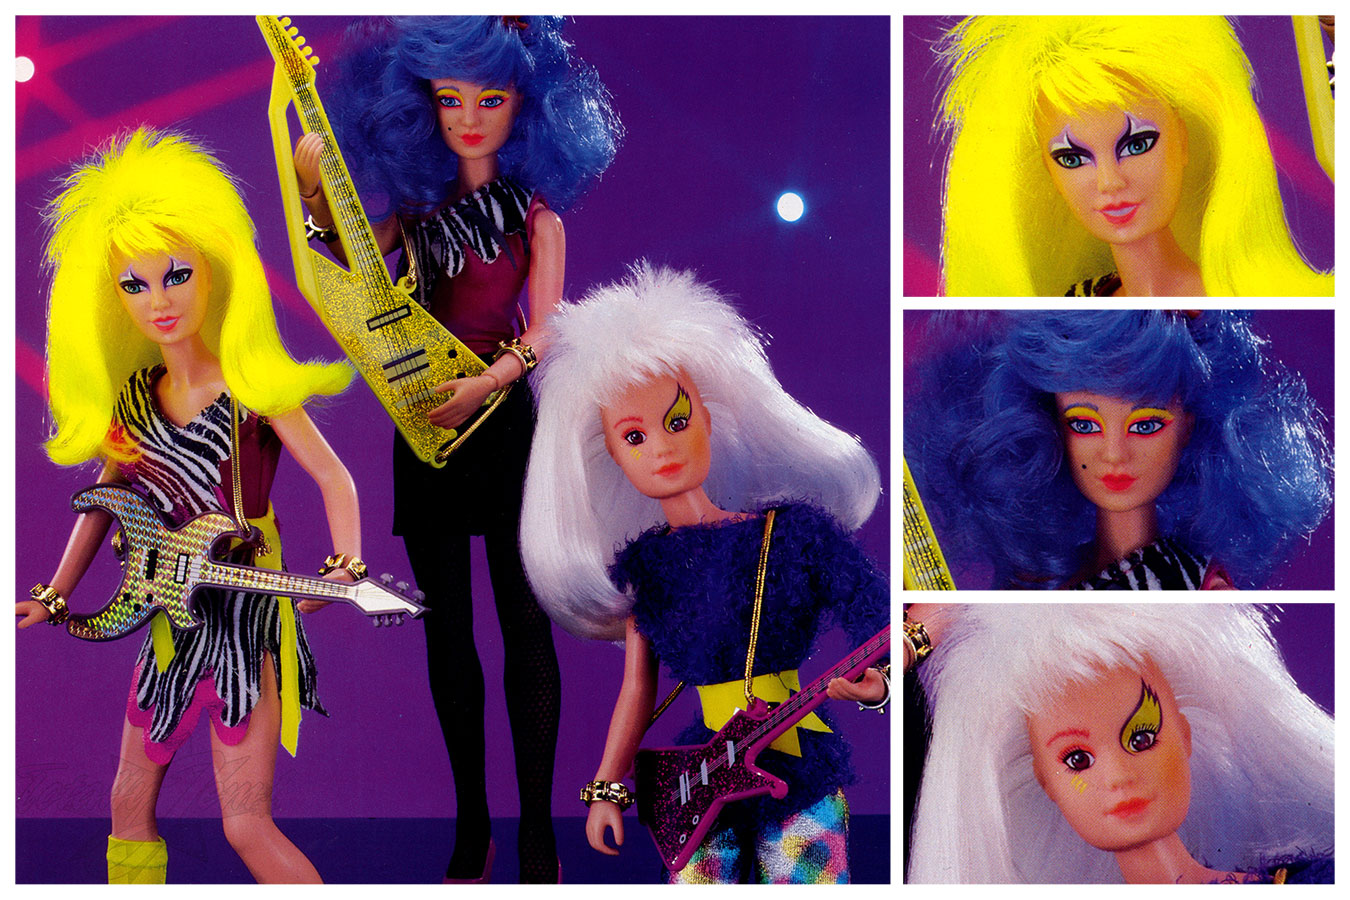 The Misfits 4010, Pizzazz, Stormer, and Roxy 1987 -- images from 1987 Hasbro Toy Fair Catalog